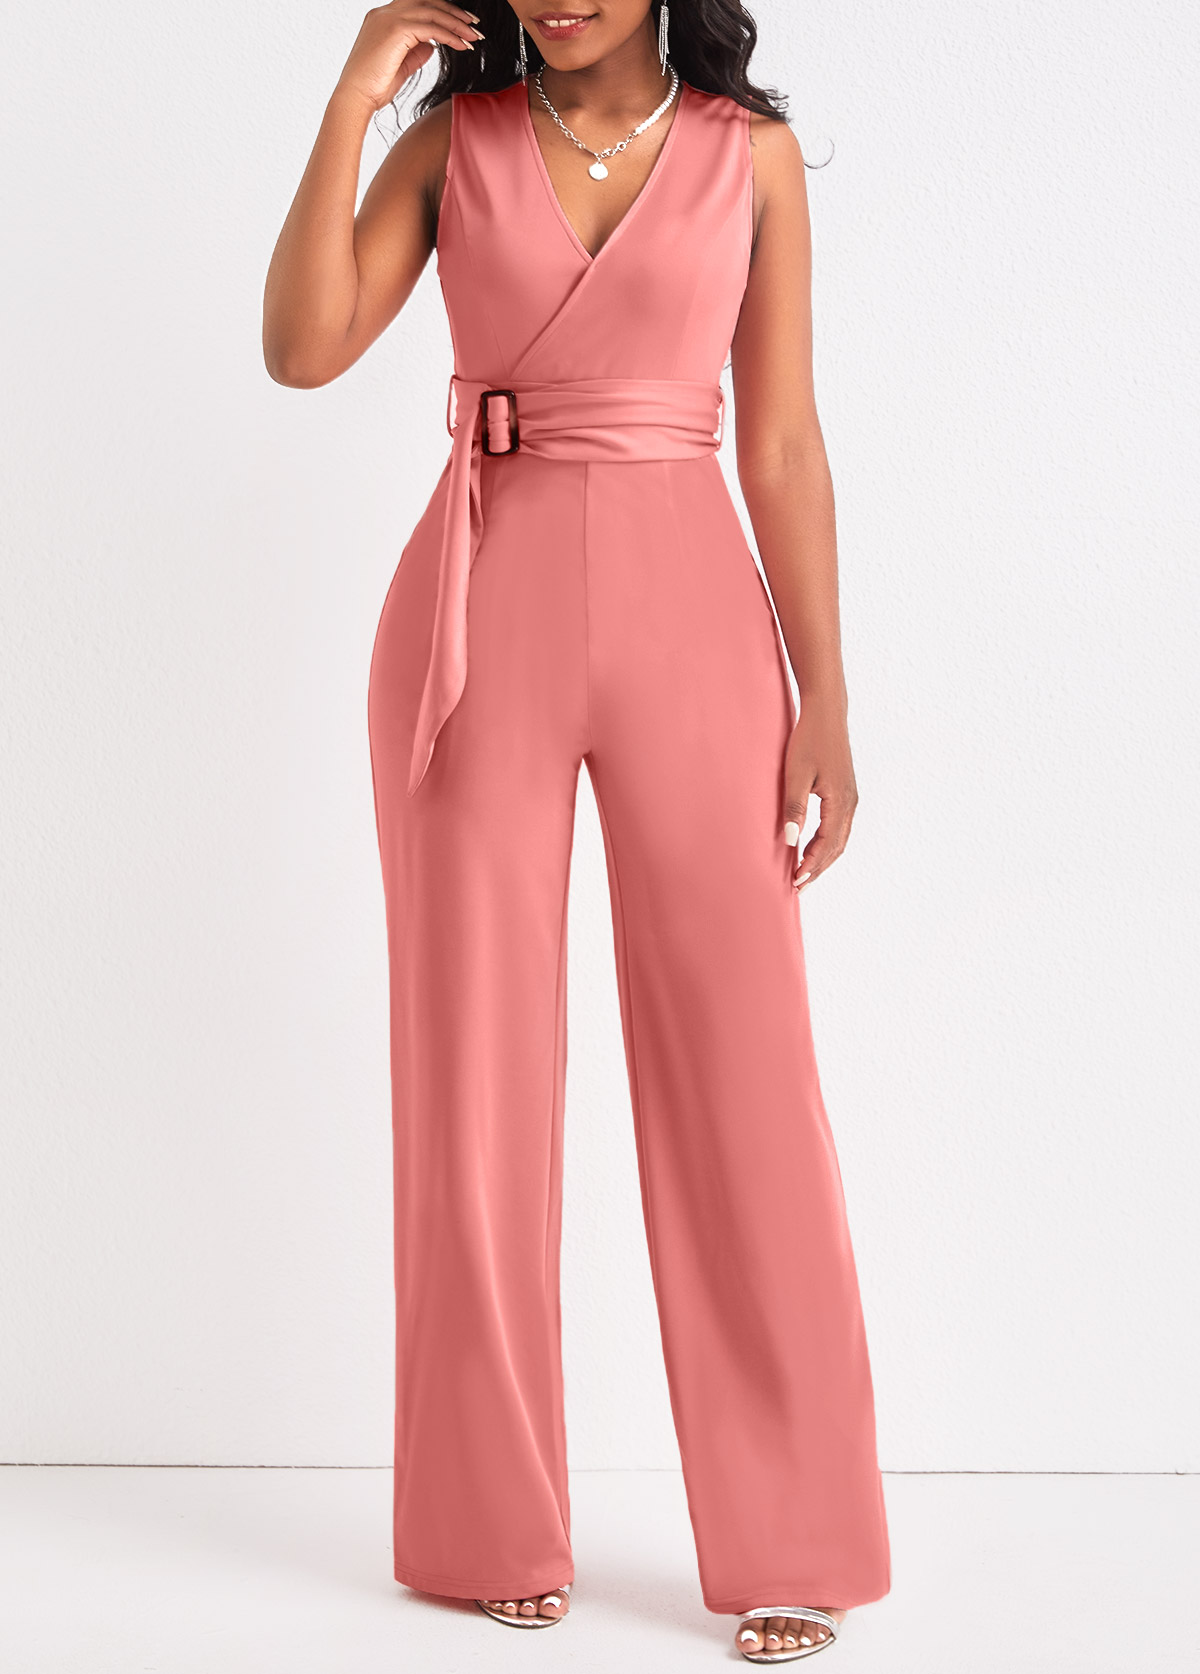 ROTITA Tie Dusty Pink Belted Long V Neck Jumpsuit